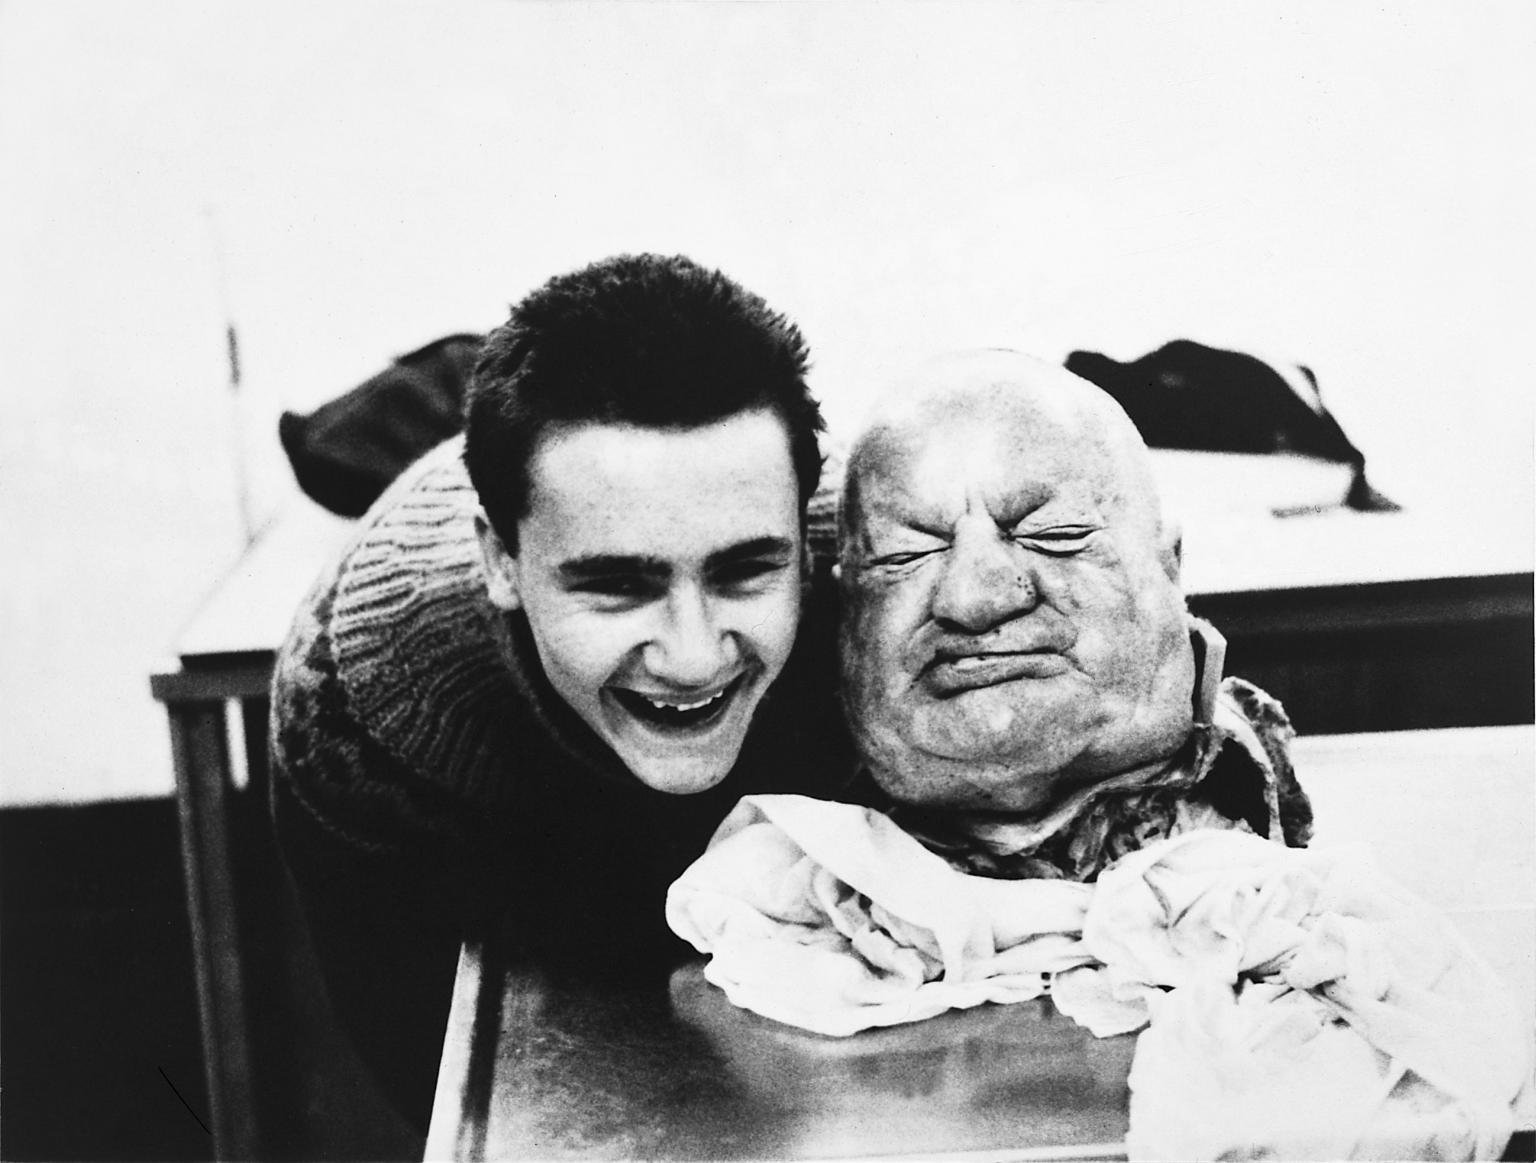 “With Dead Head” British artist Damien Hirst poses with a severed head in a morgue in 1981.